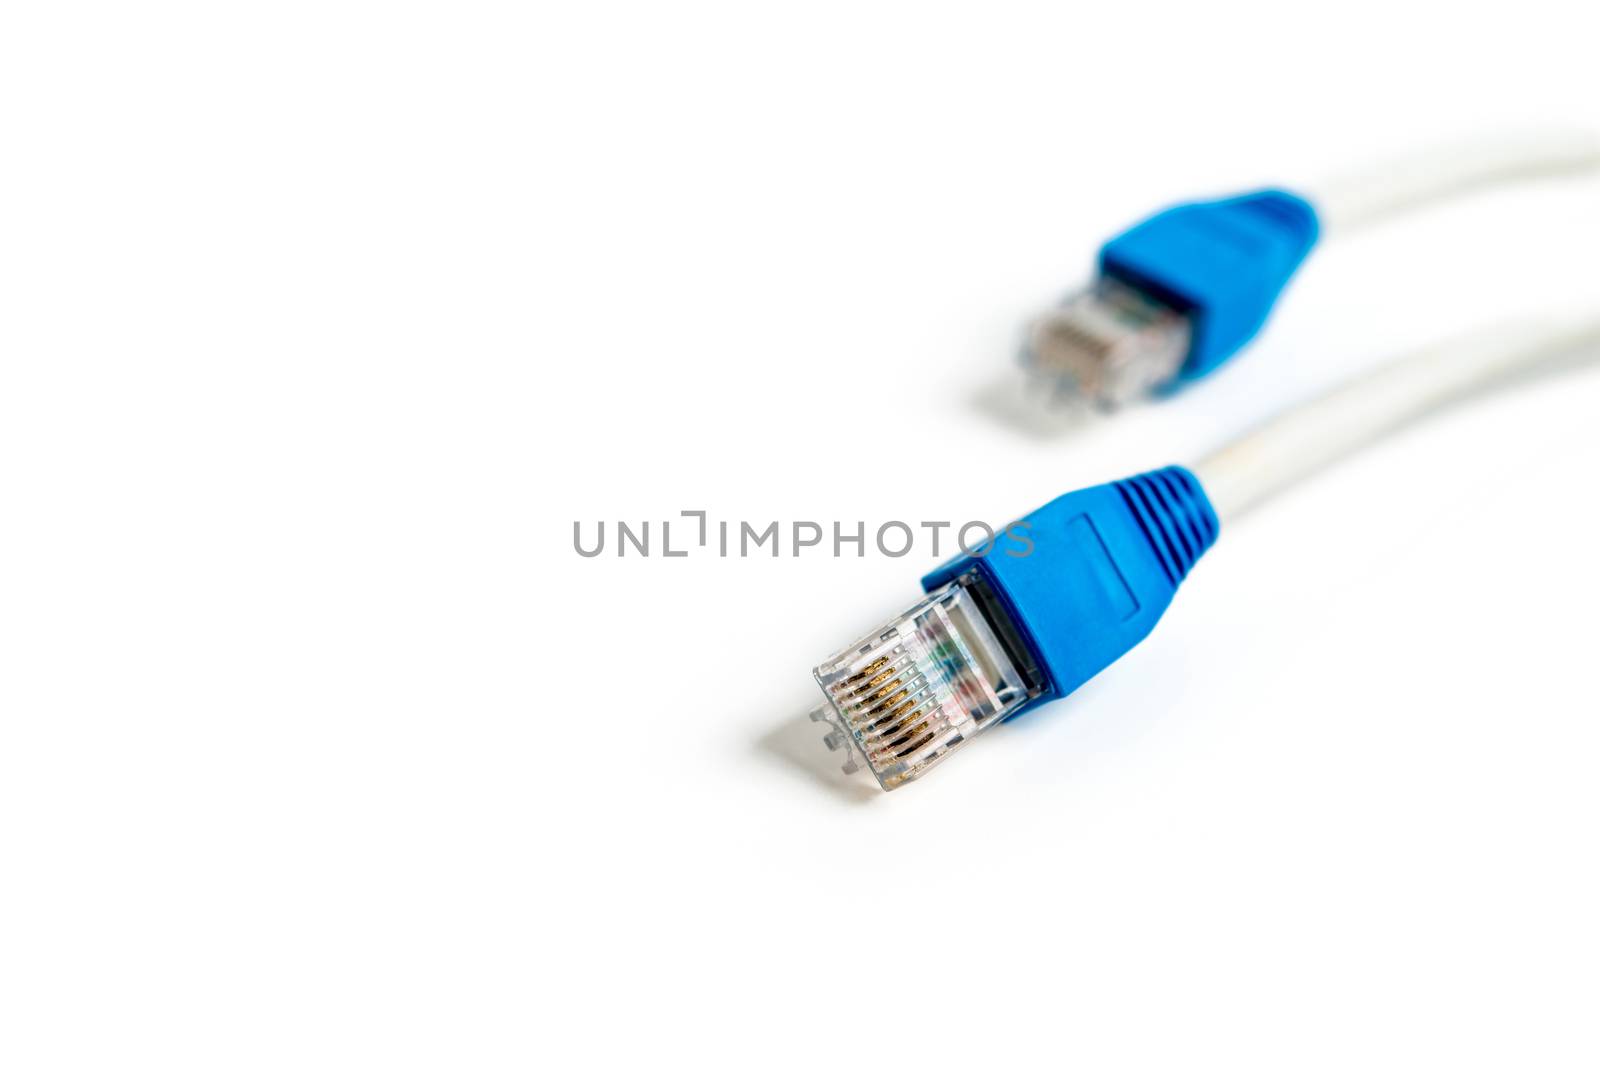 Network cable by antpkr